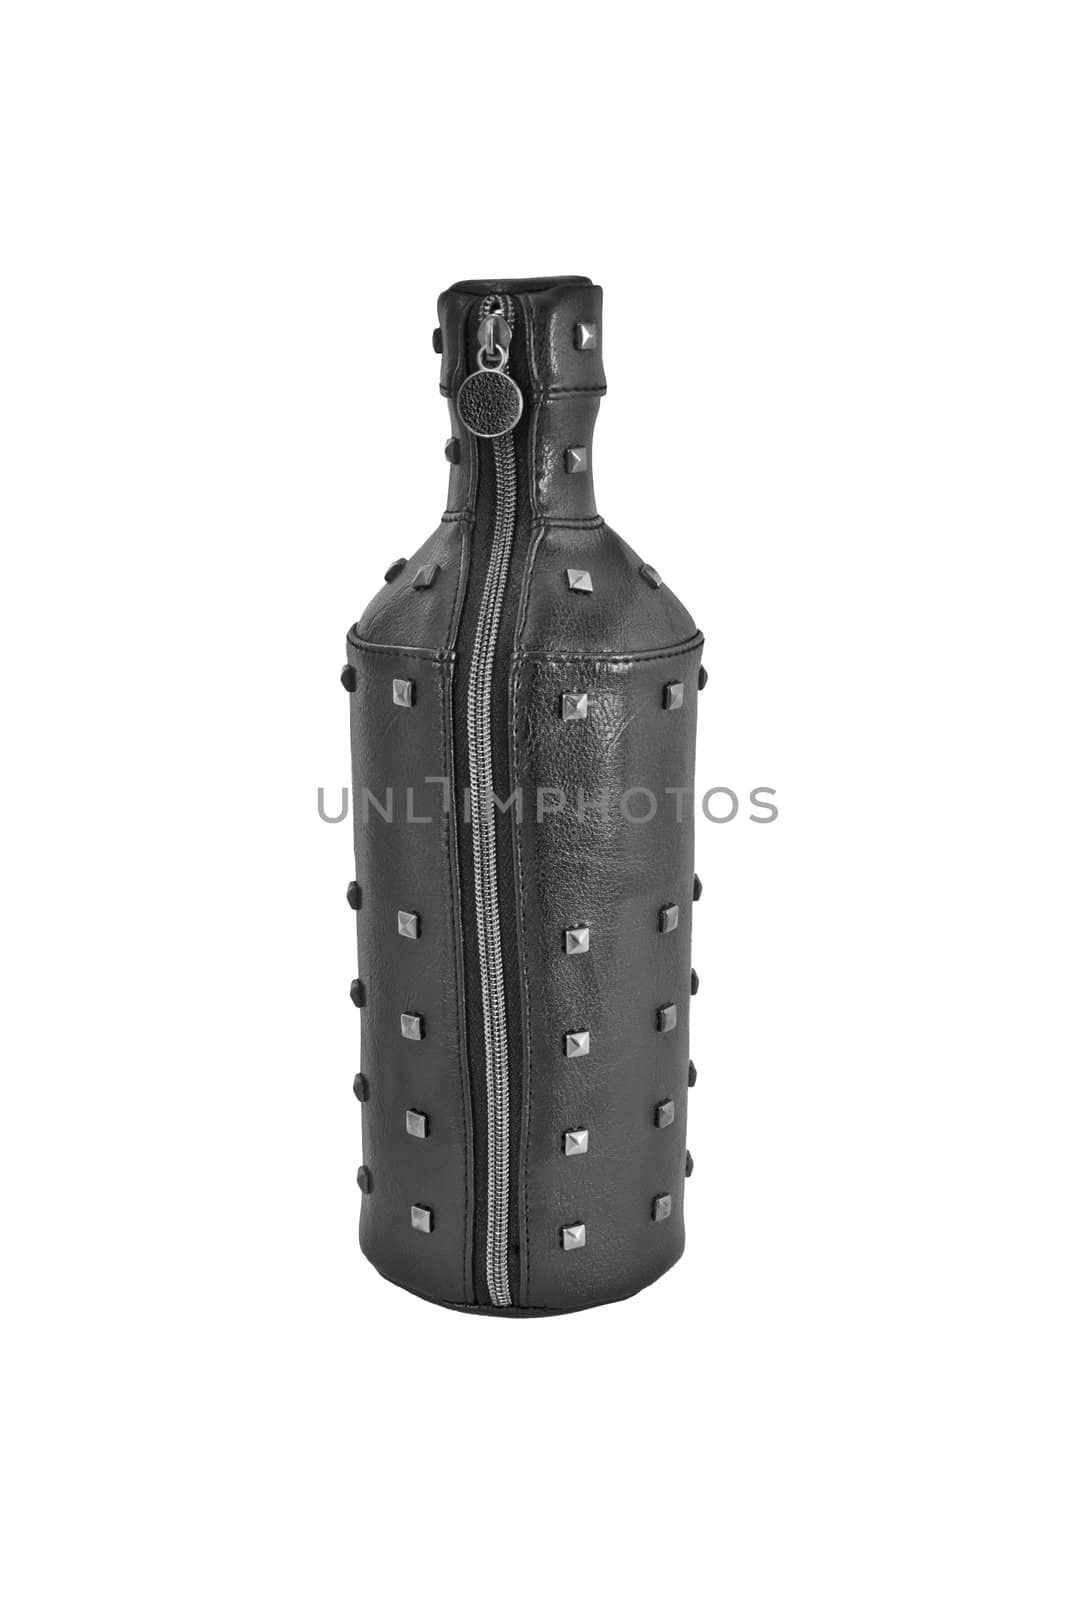 Bottle, a black leather case with rivets on a white background